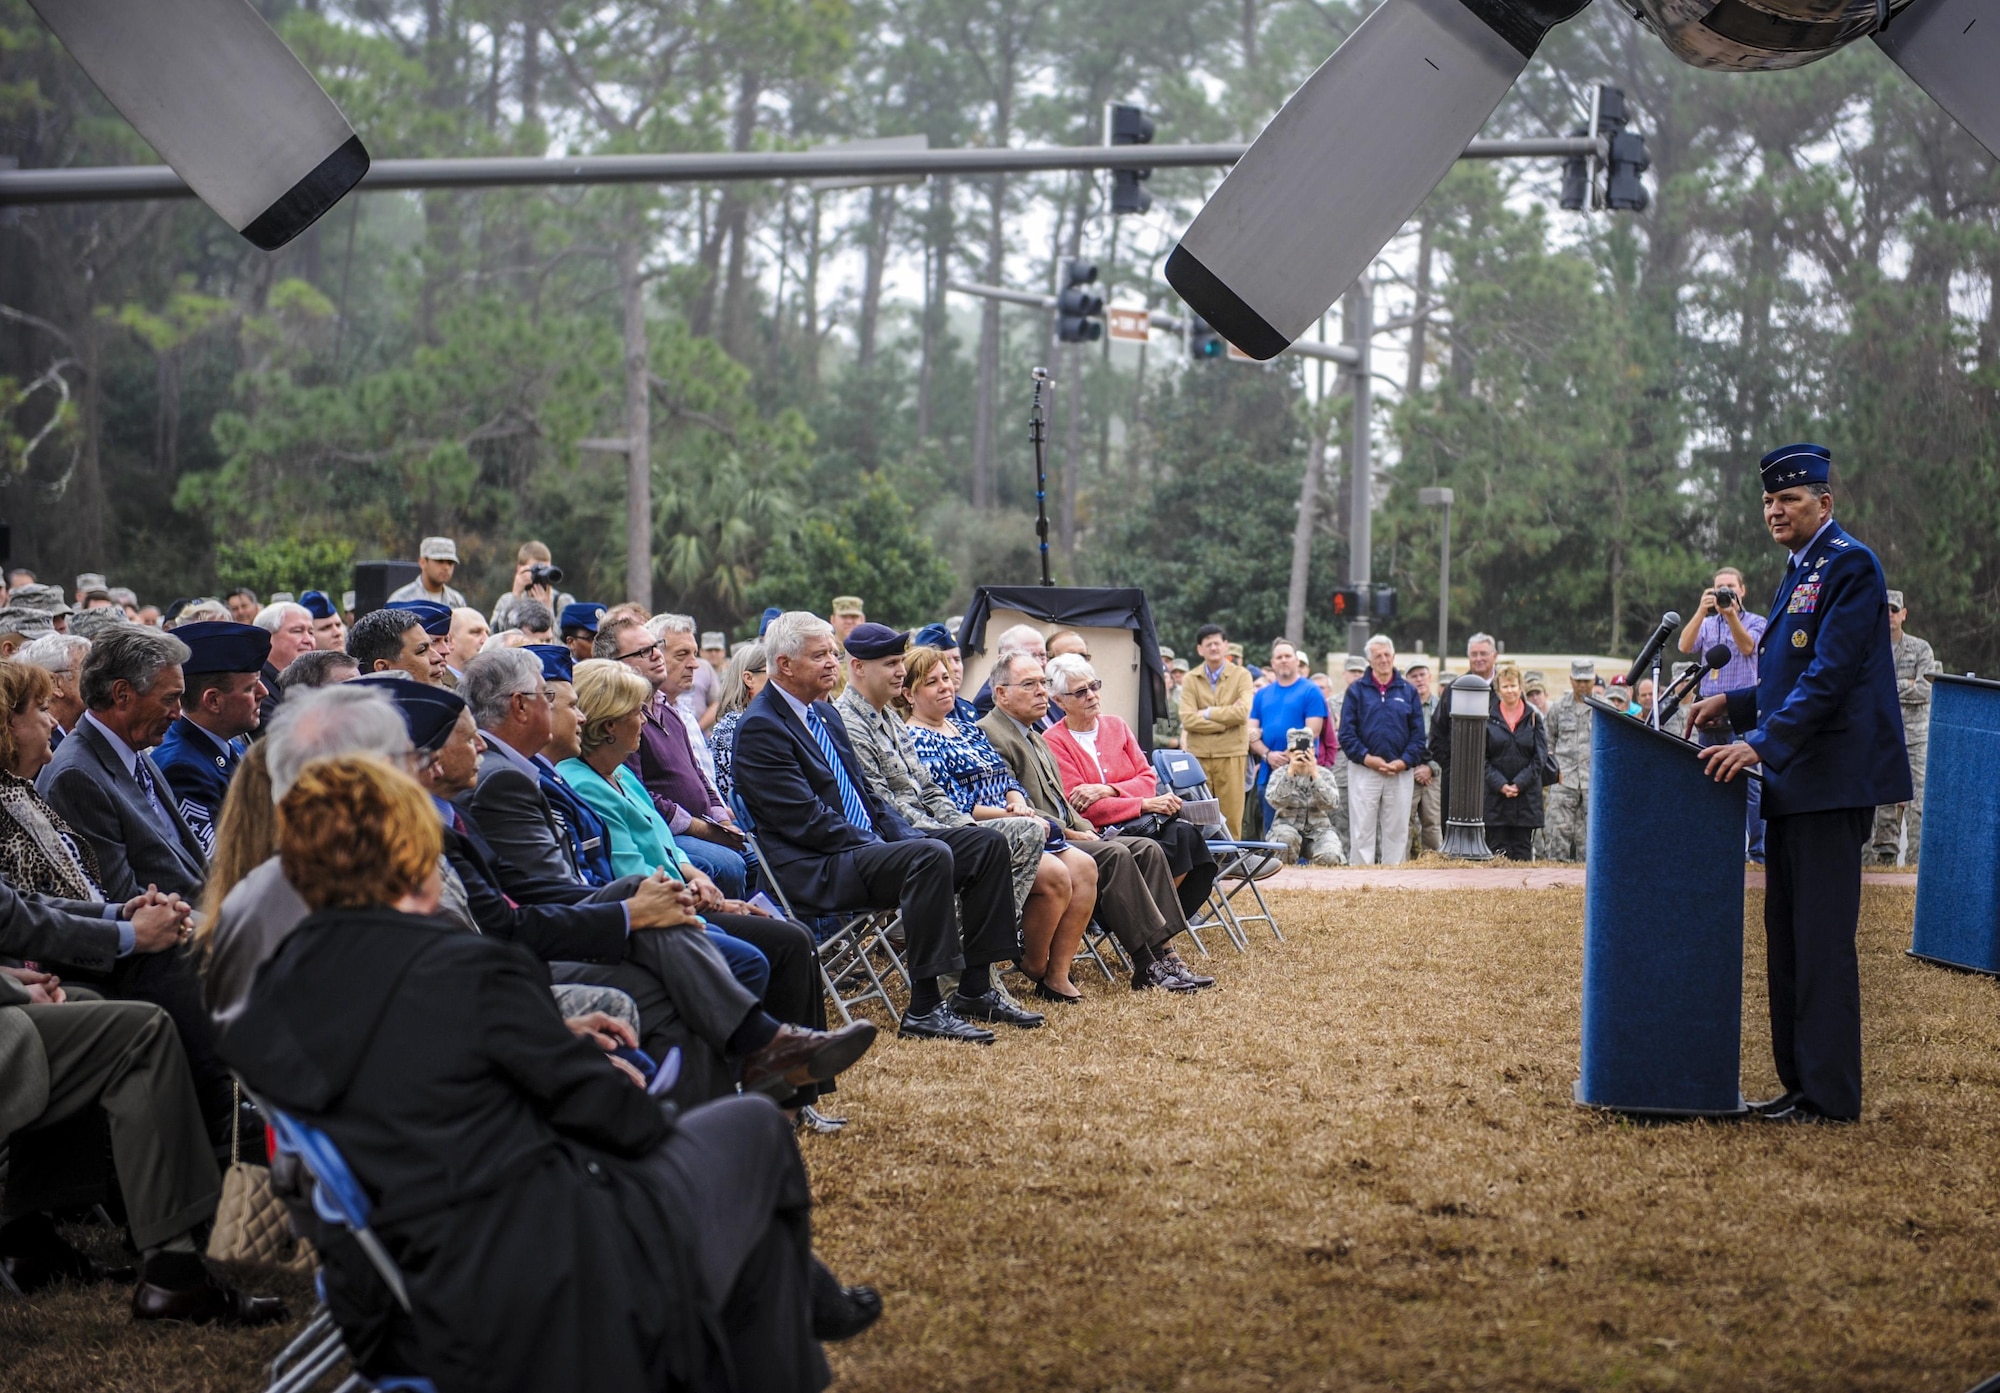 Lt. Gen. Brad Heithold, commander of Air Force Special Operations Command, speaks to guests during the AC-130H Spectre dedication ceremony at Hurlburt Field, Fla., Feb. 2, 2016. More than 400 people attended the dedication ceremonies for the AC-130H Spectre and MC-130P Combat Shadow to honor the legacy of these aircraft at the air park.  As the aircraft retire, the Air Force and Air Force Special Operations Command modernize the fleet with the AC-130J Ghostrider and MC-130J Commando II. (U.S. Air Force photo by Senior Airman Meagan Schutter)